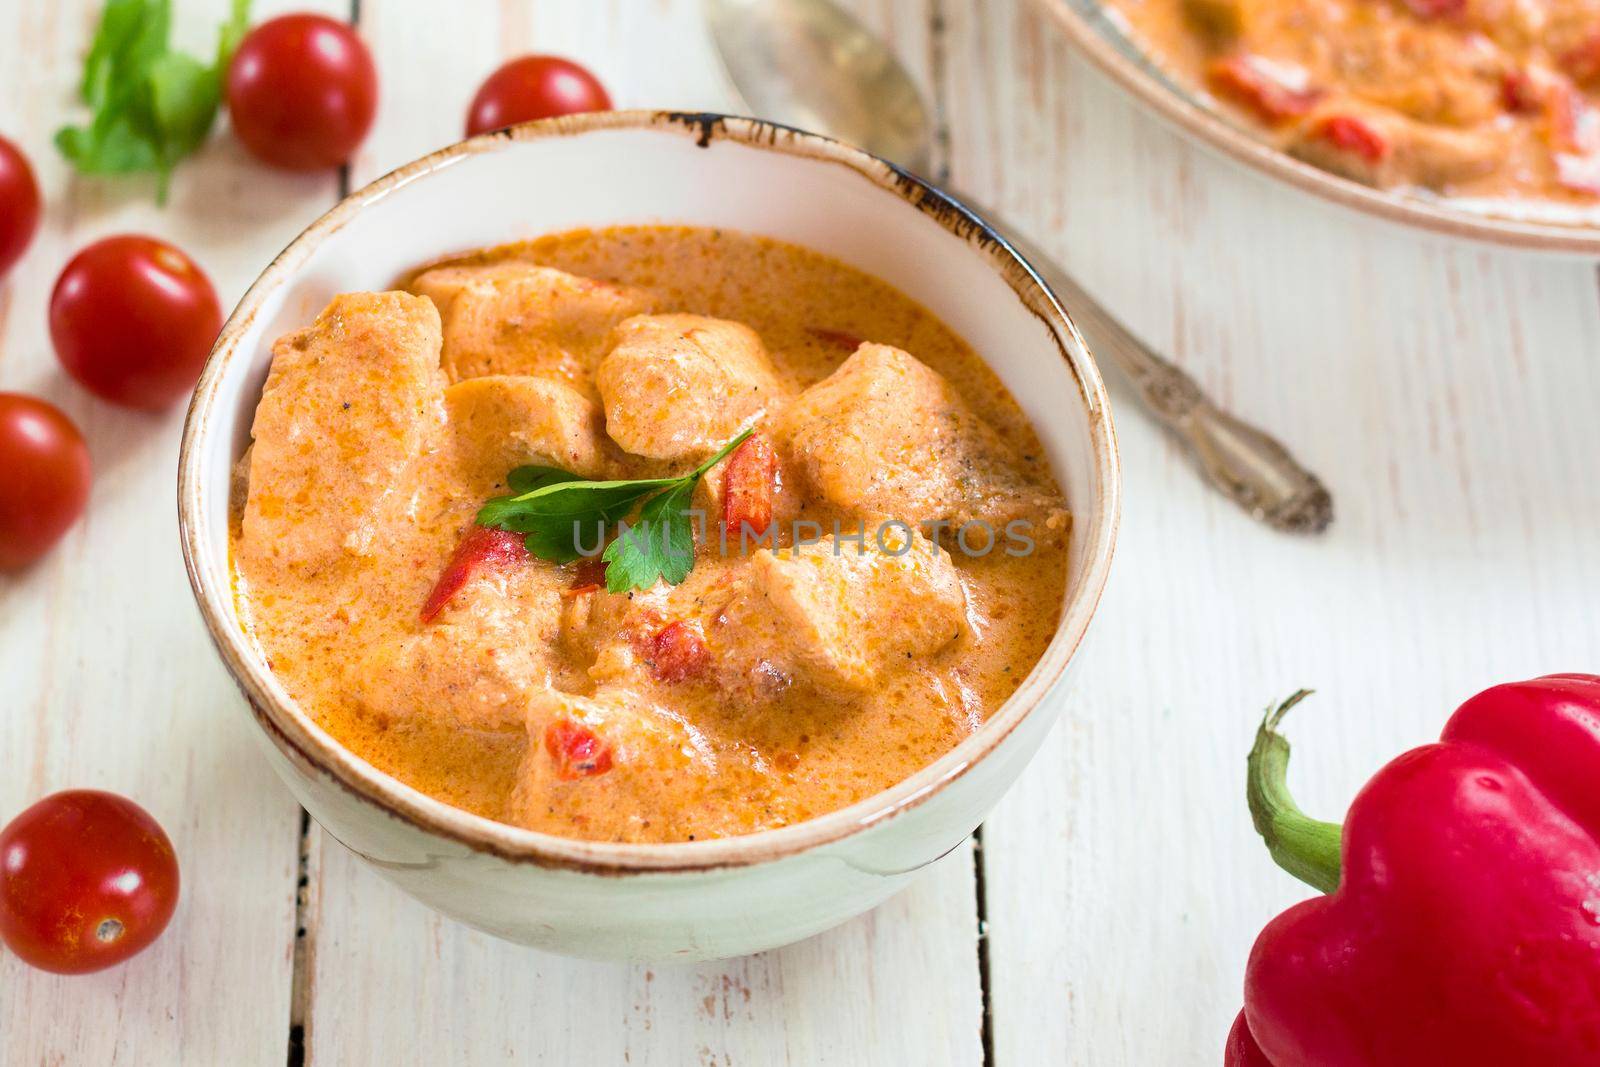 Delicious chicken stew with paprika in a bowl on a white wooden table. With fresh cherry tomatoes, red bell pepper and parsley. Traditional hungarian dish paprikash. Comfort food. Selective focus